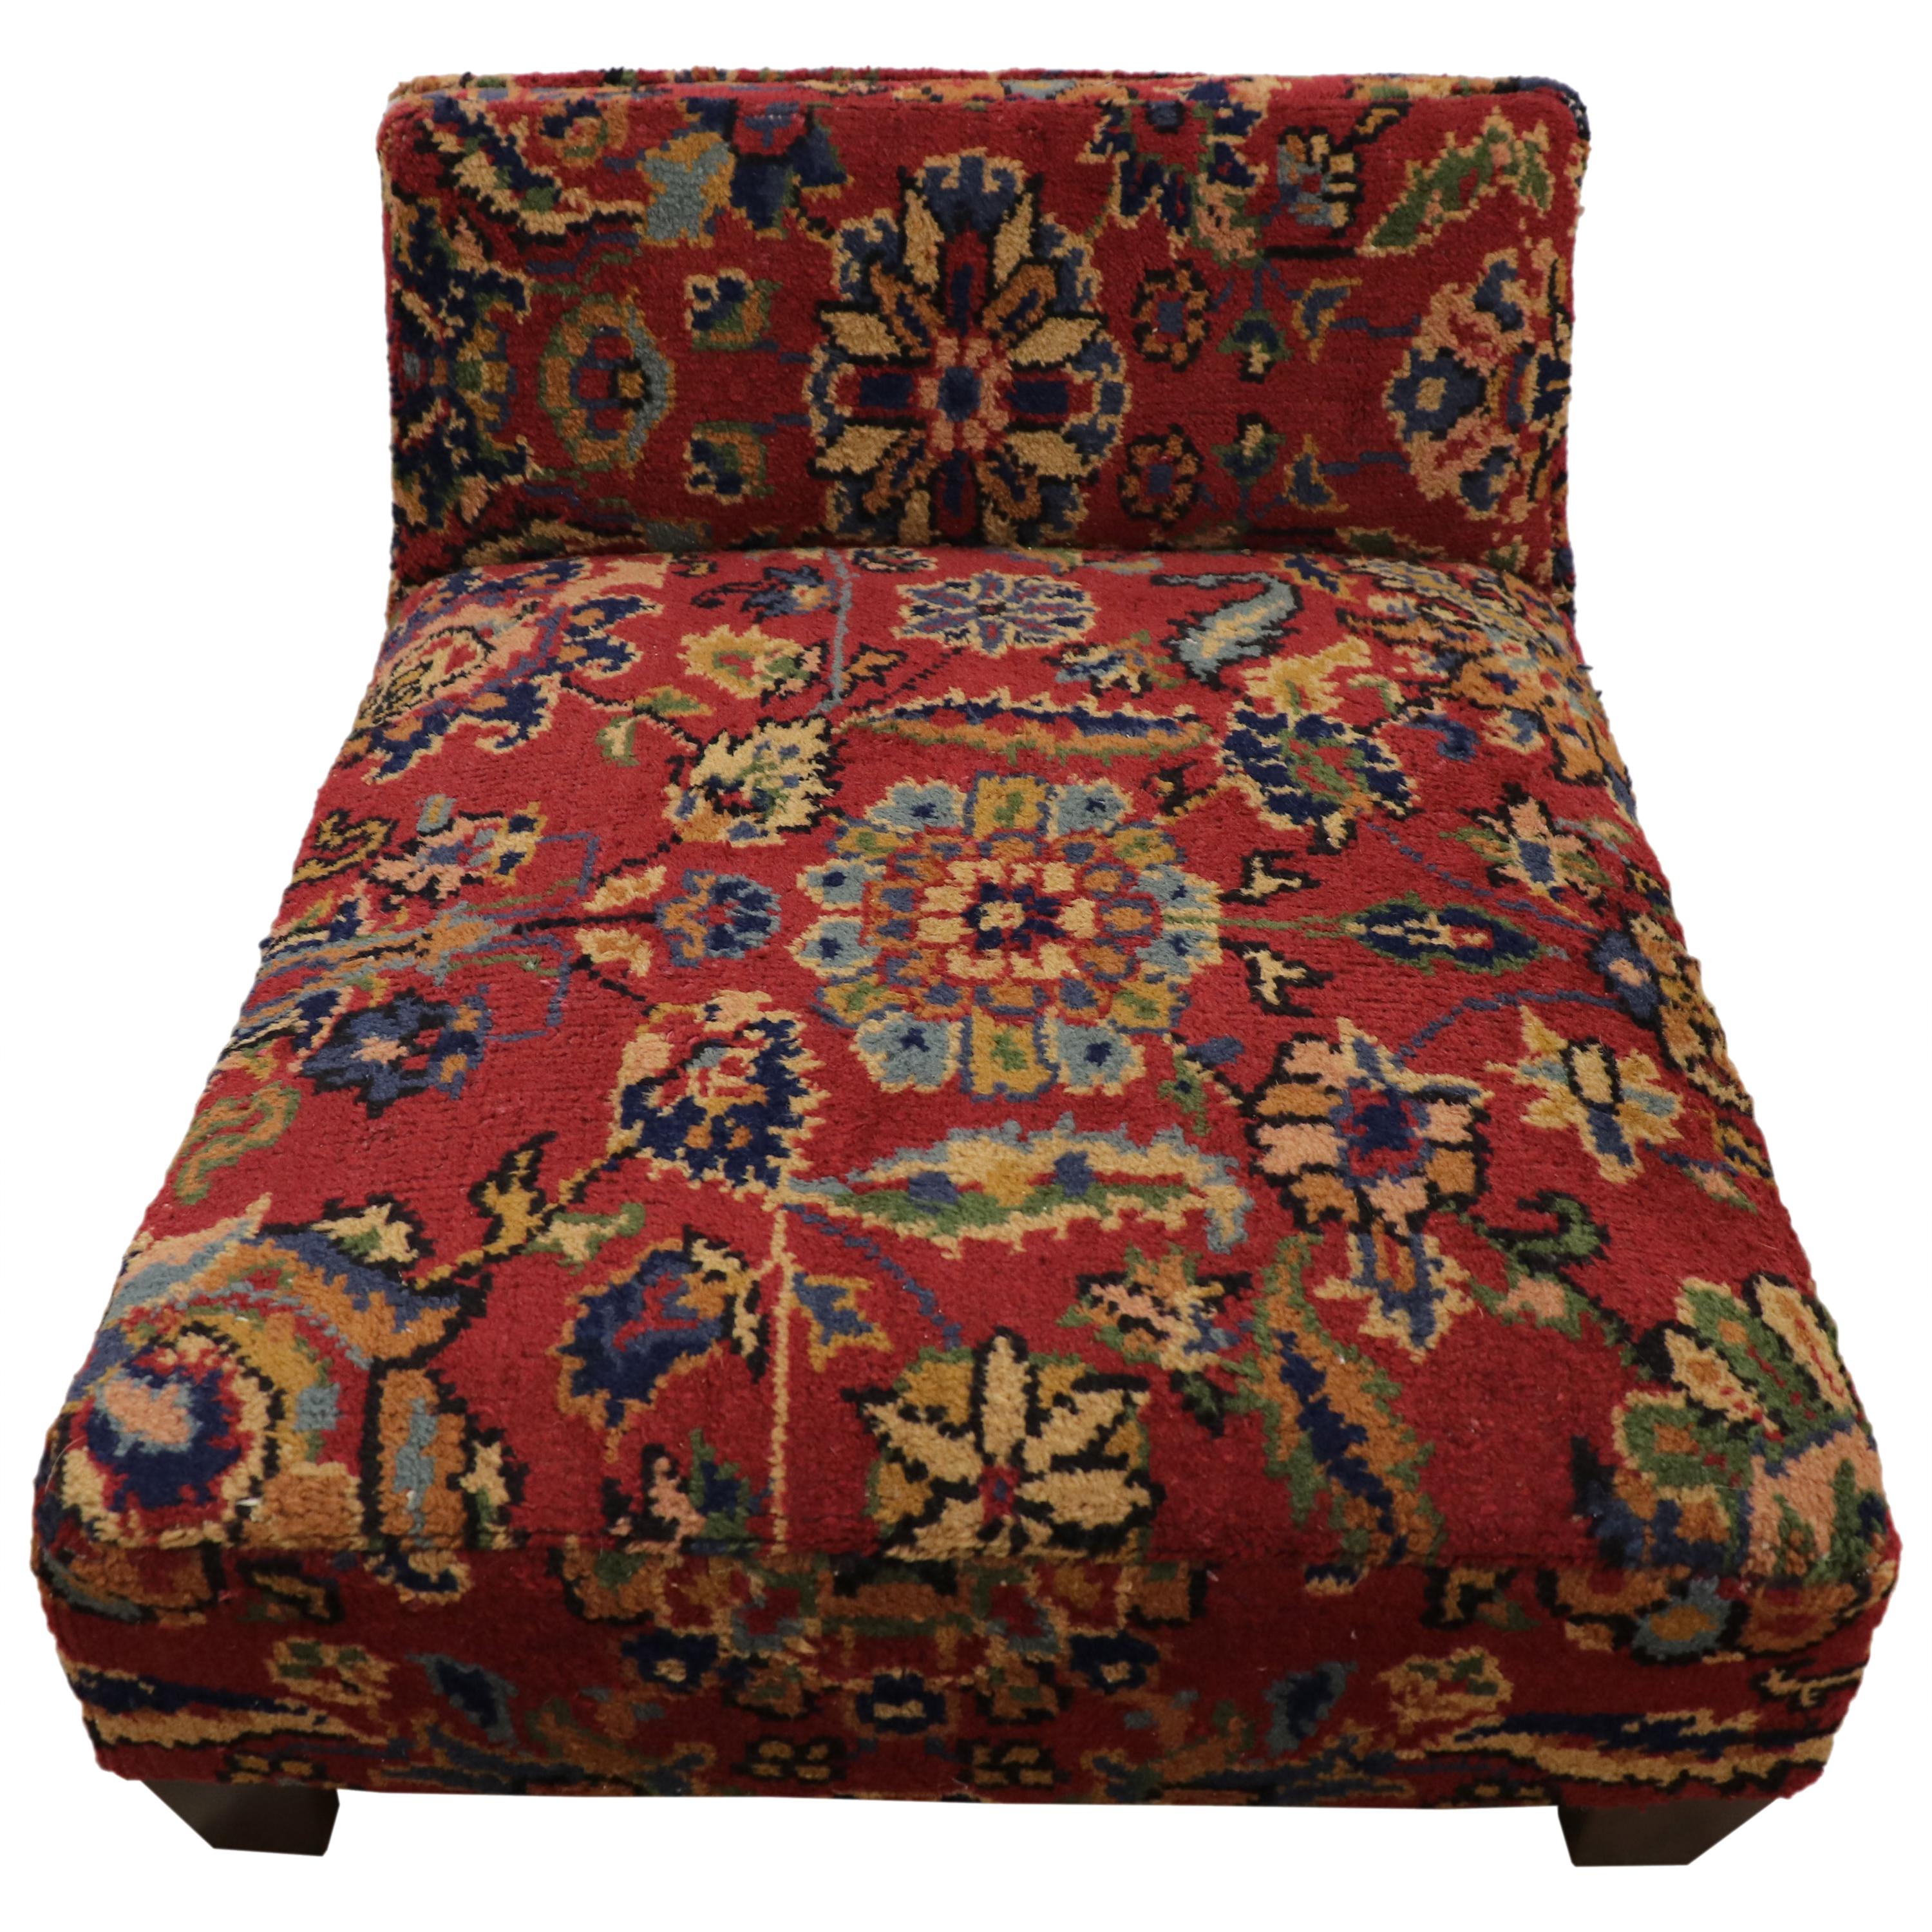 Low Profile Upholstered Slipper Chair from Antique Persian Rug or Luxury Petbed